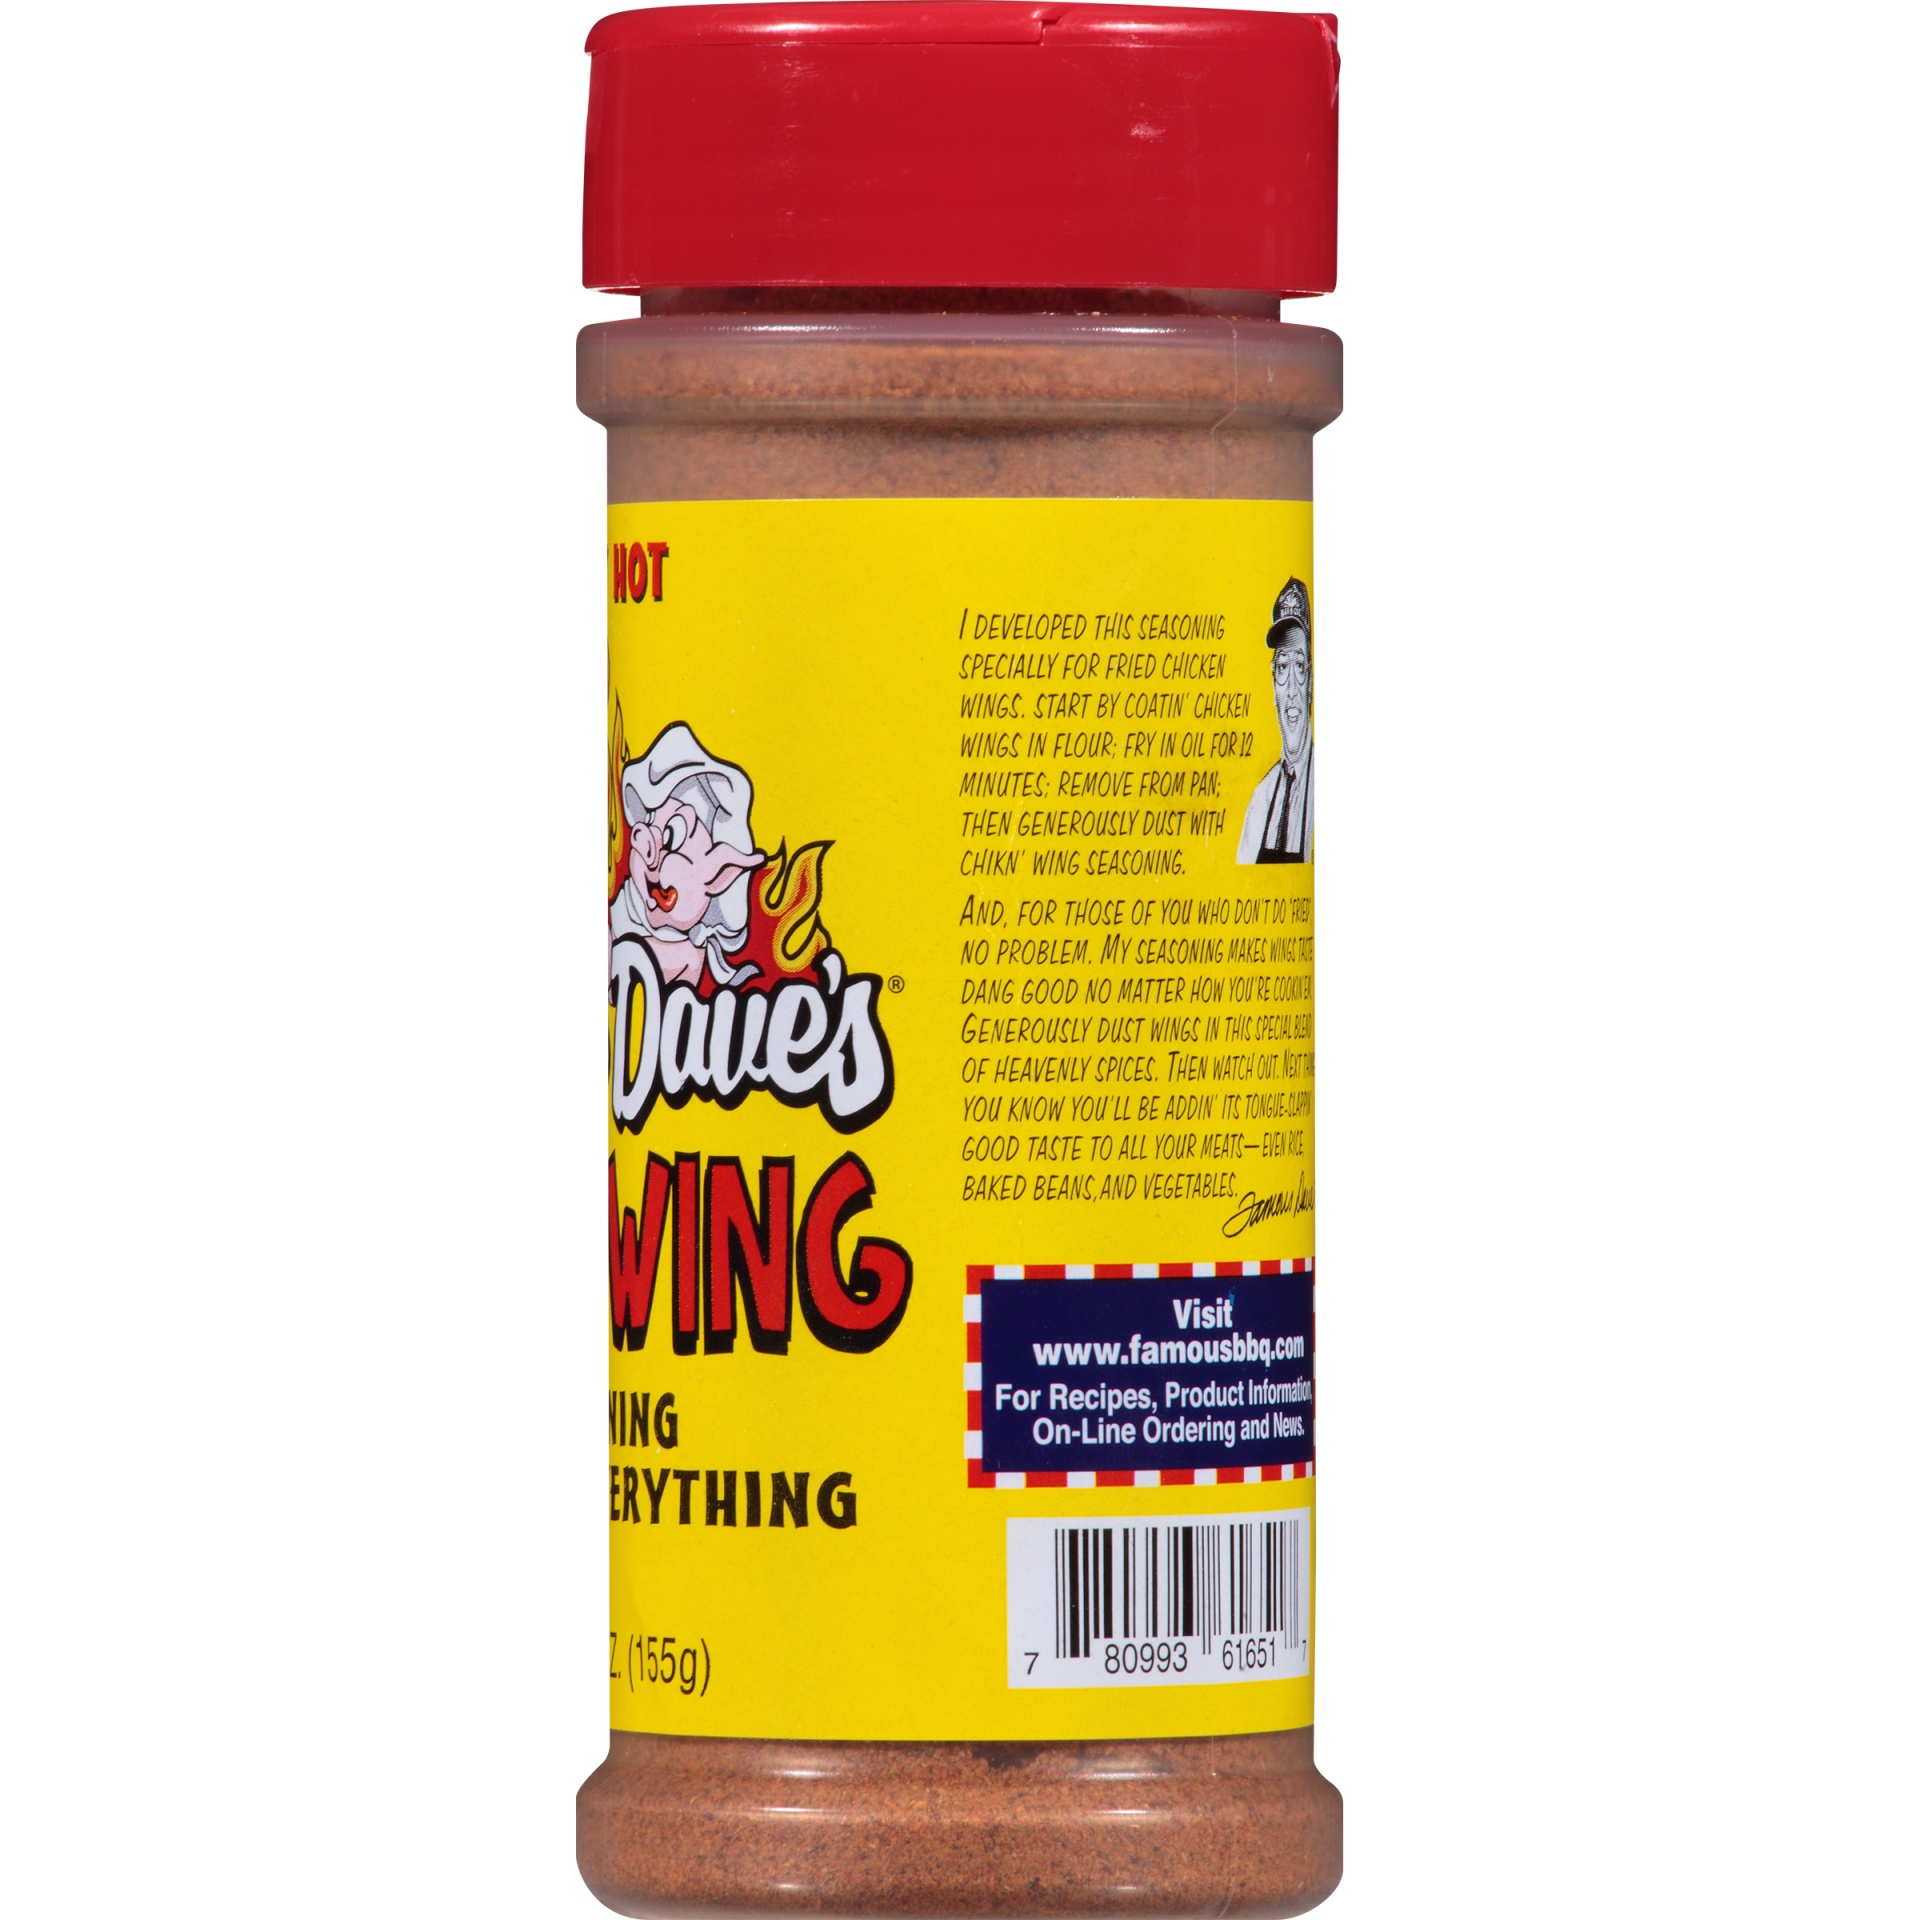 Twix Seasoning Is Real and You're Supposed to Try It on Chicken Wings